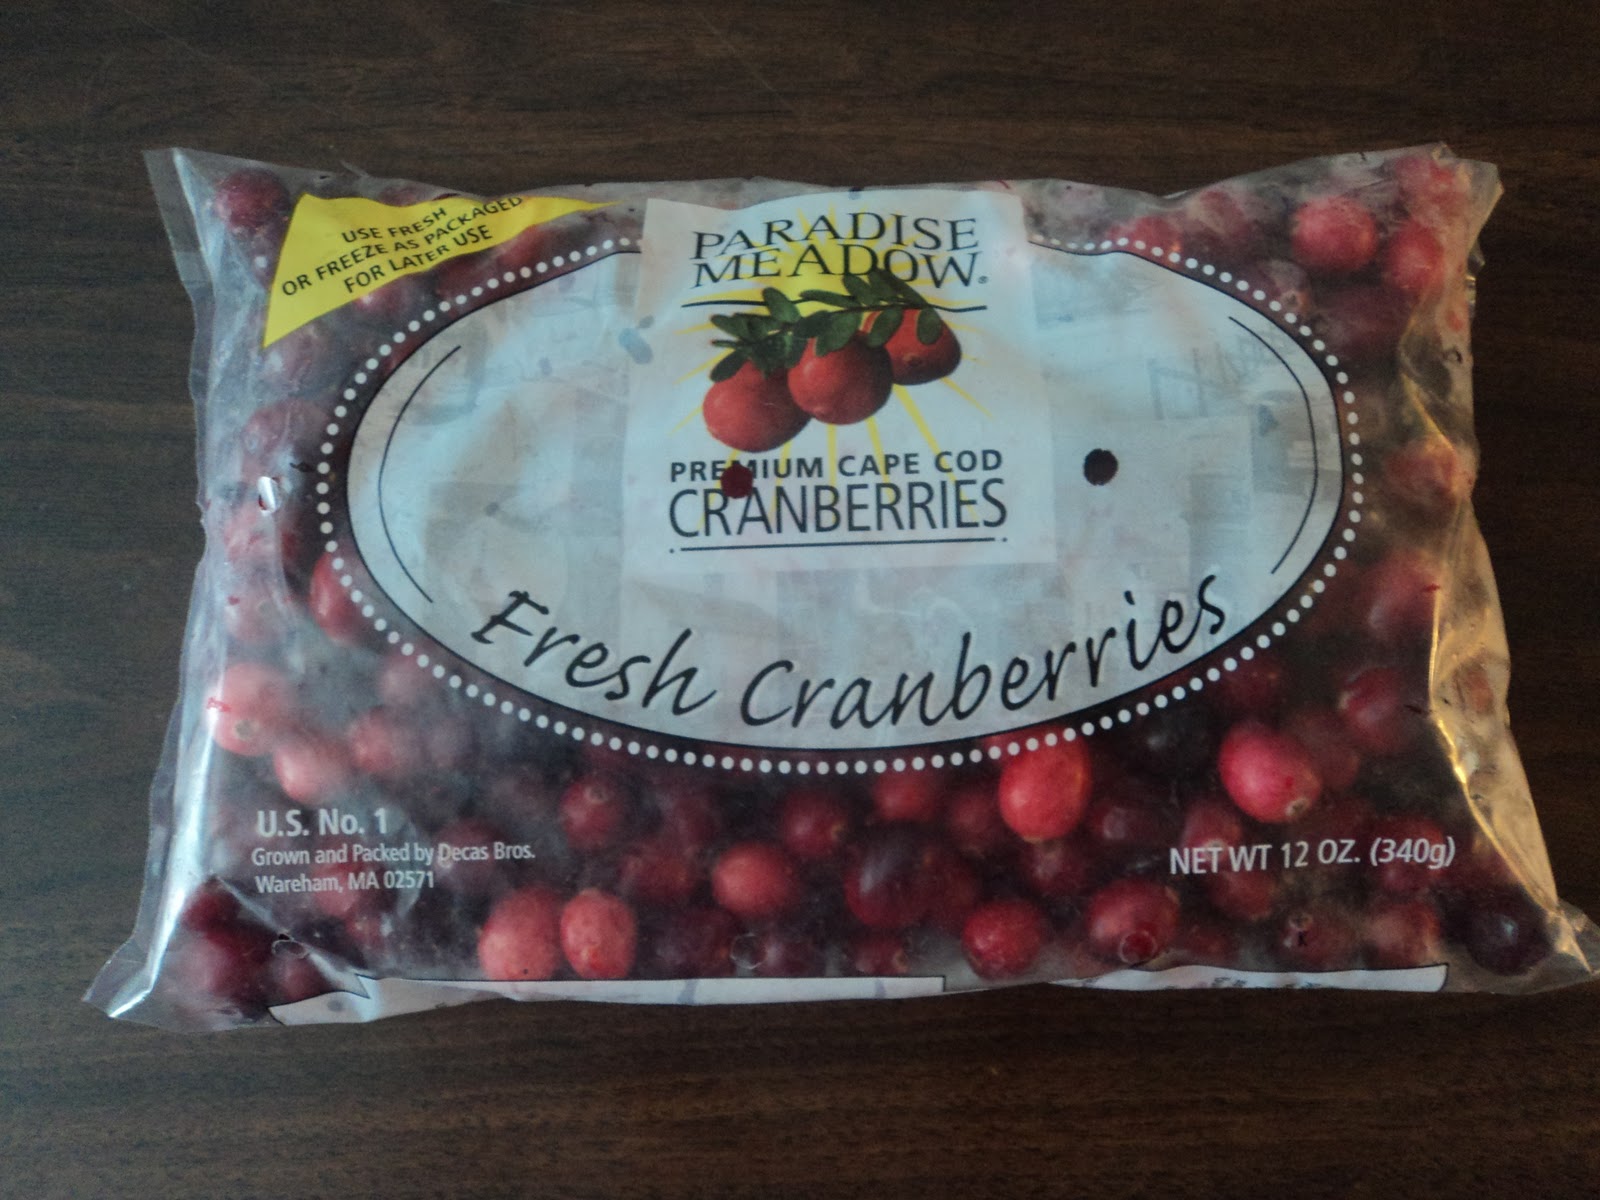 Virginia's Life, Such As It Is!: Fresh Cranberries!